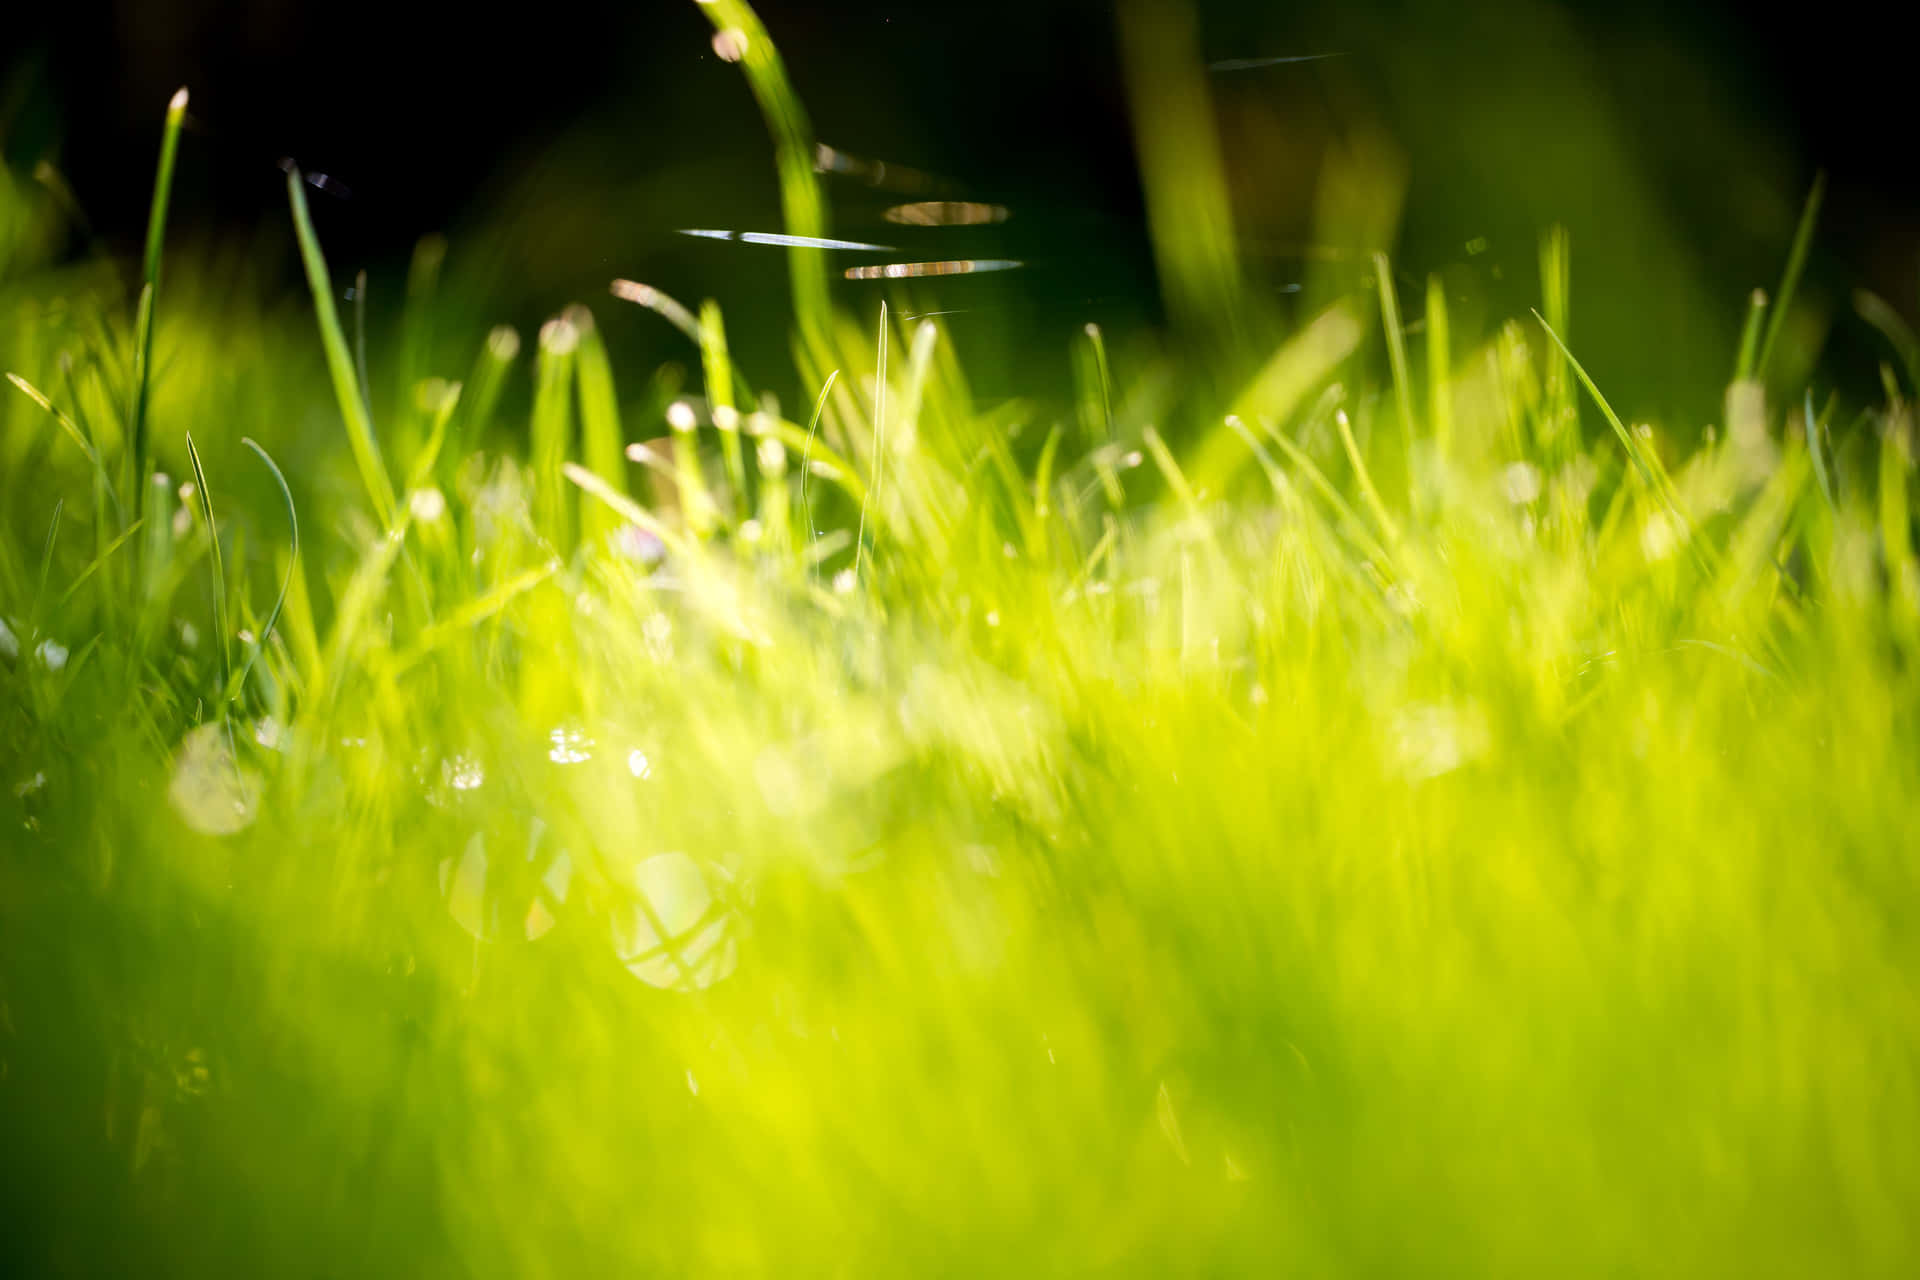 Image  Enjoy the freshness of nature with a peaceful grassy background